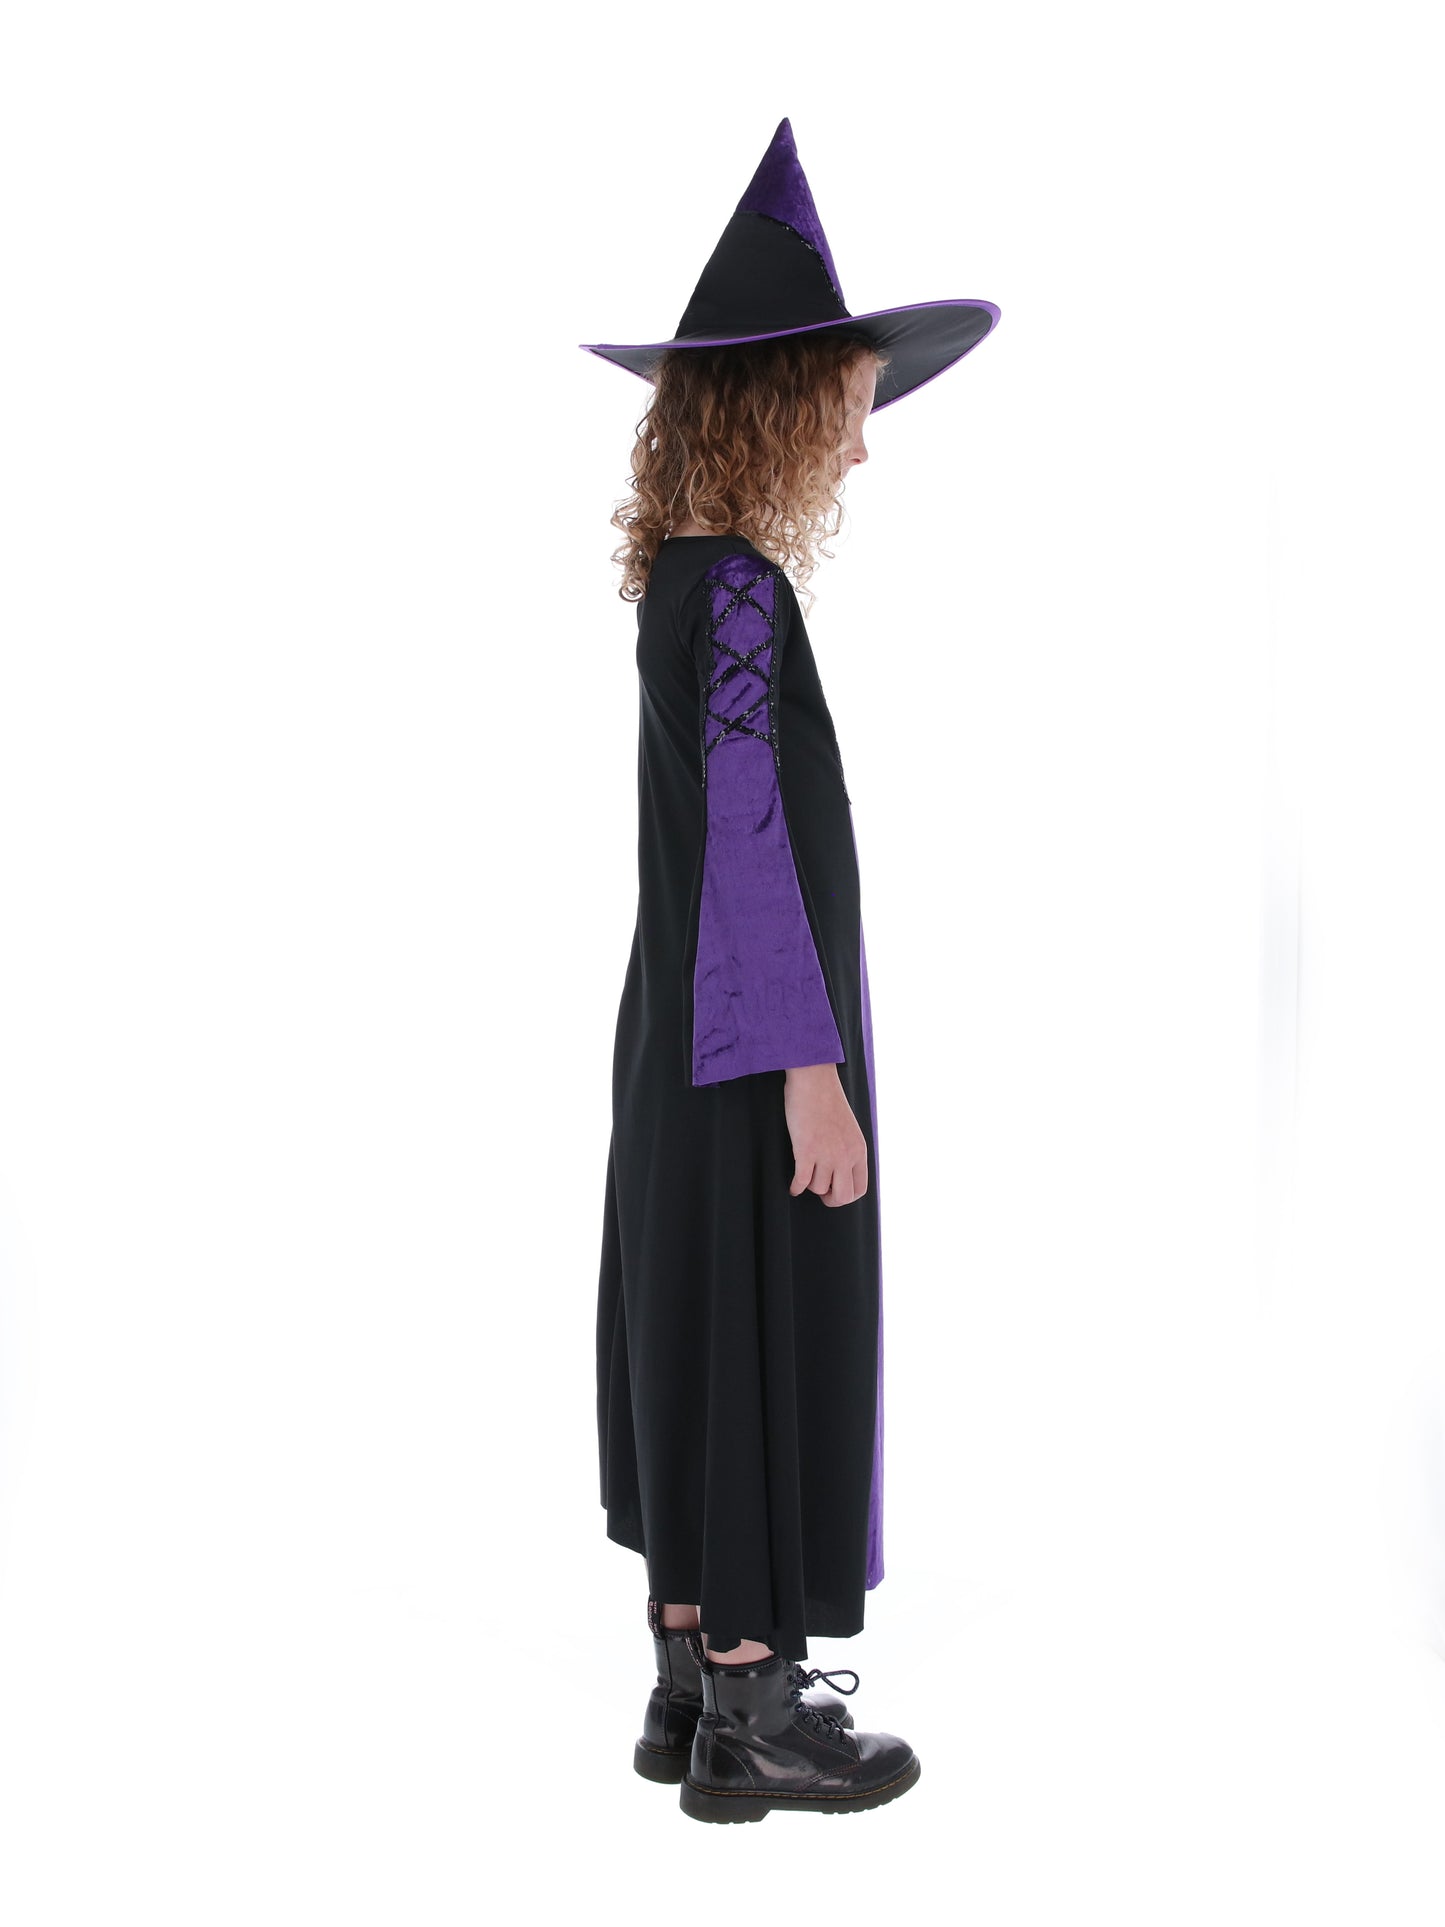 Bewitched Costume, Black and Purple